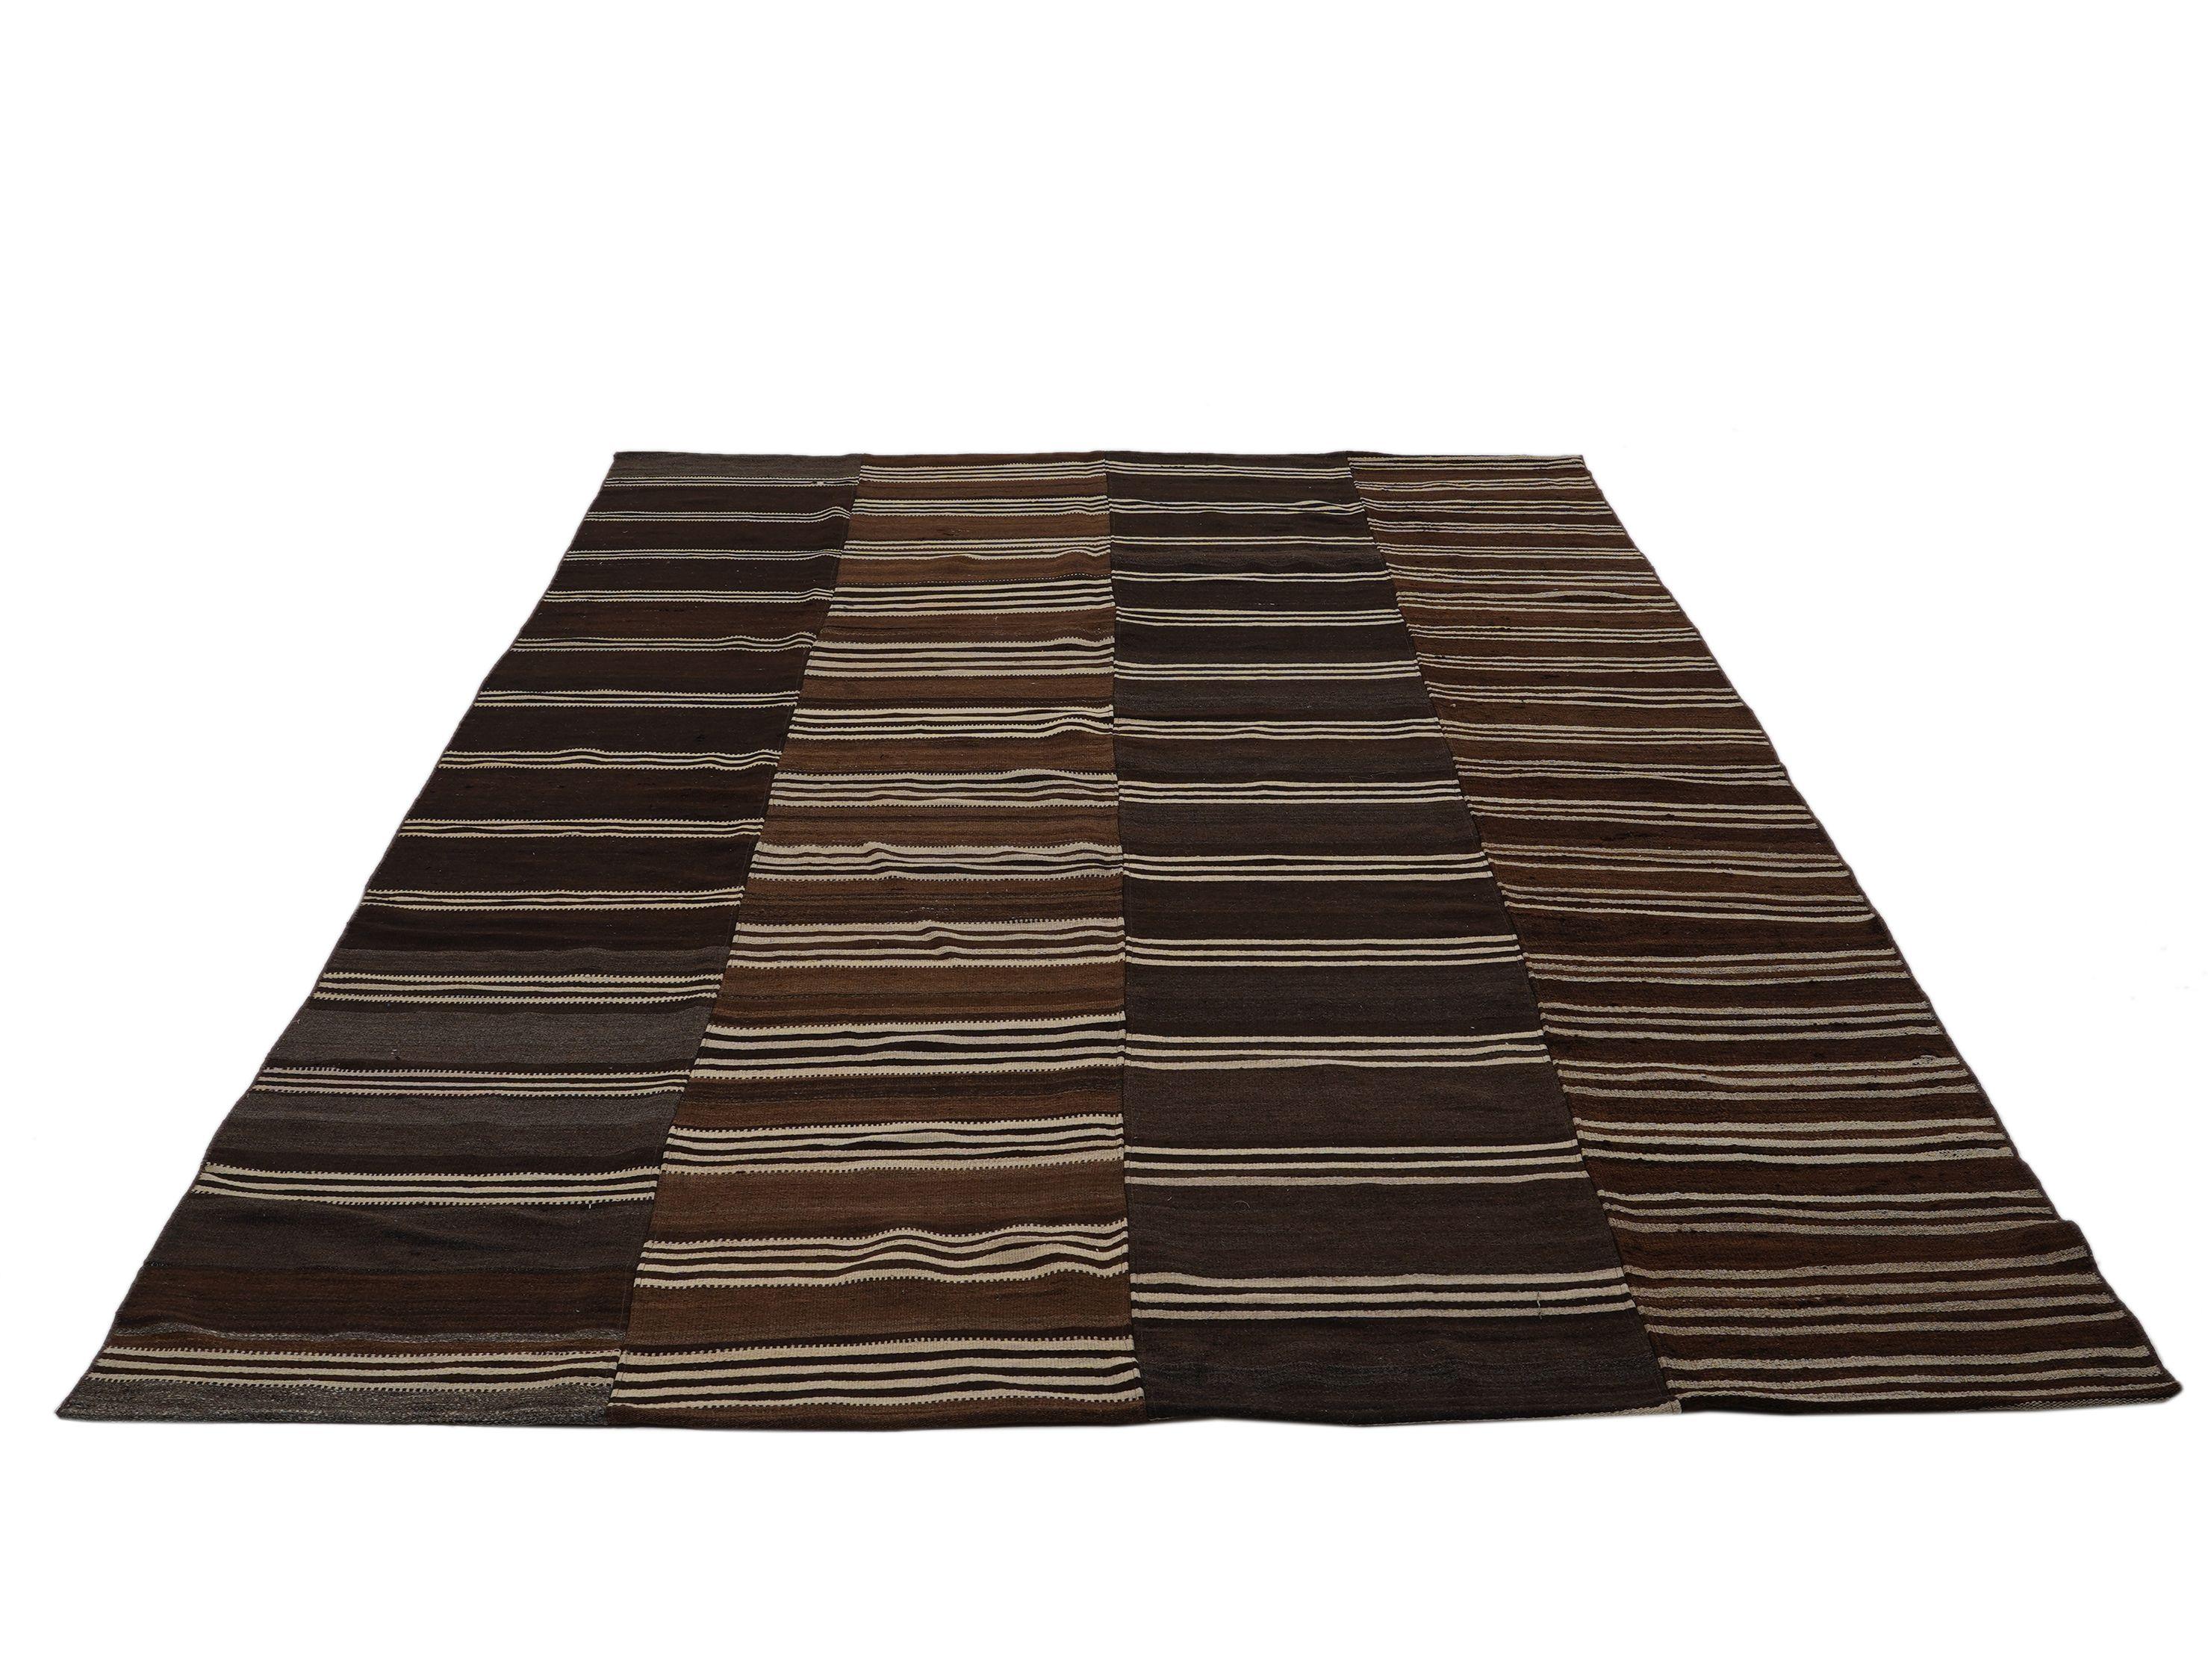 Handmade by skilled weavers in Turkey, this panel stripe rug in rich earthy brown tones is both timeless and contemporary. 

Our Turkish rugs are made using ancient art forms passed down through generations. Skilled artisans use traditional